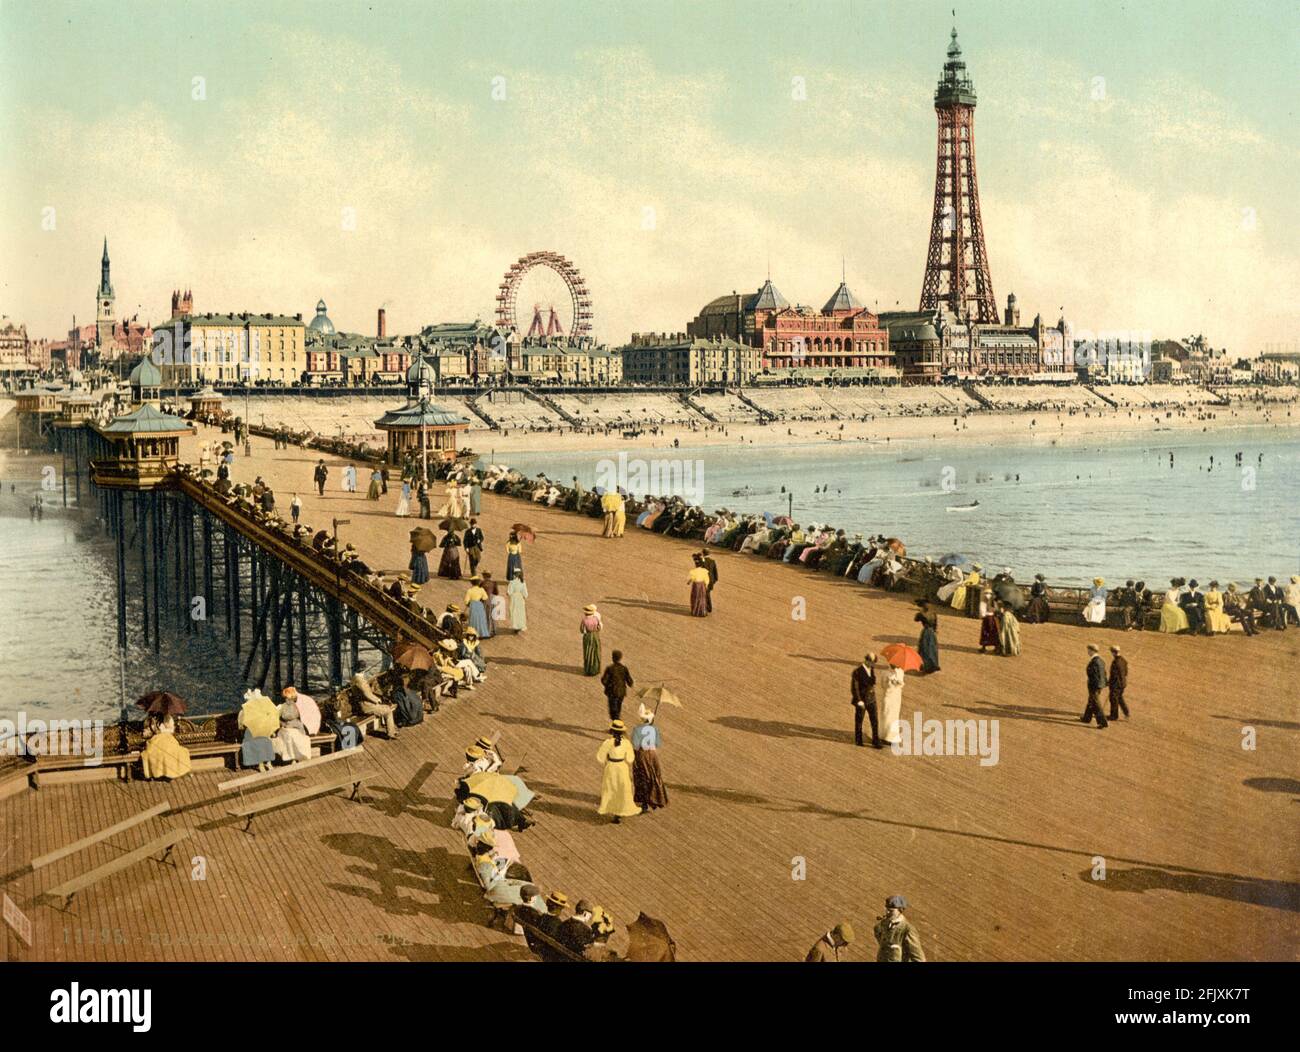 The seaside resort of Blackpool in Lancashire circa 1890-1900, with the North Pier and the Tower Stock Photo